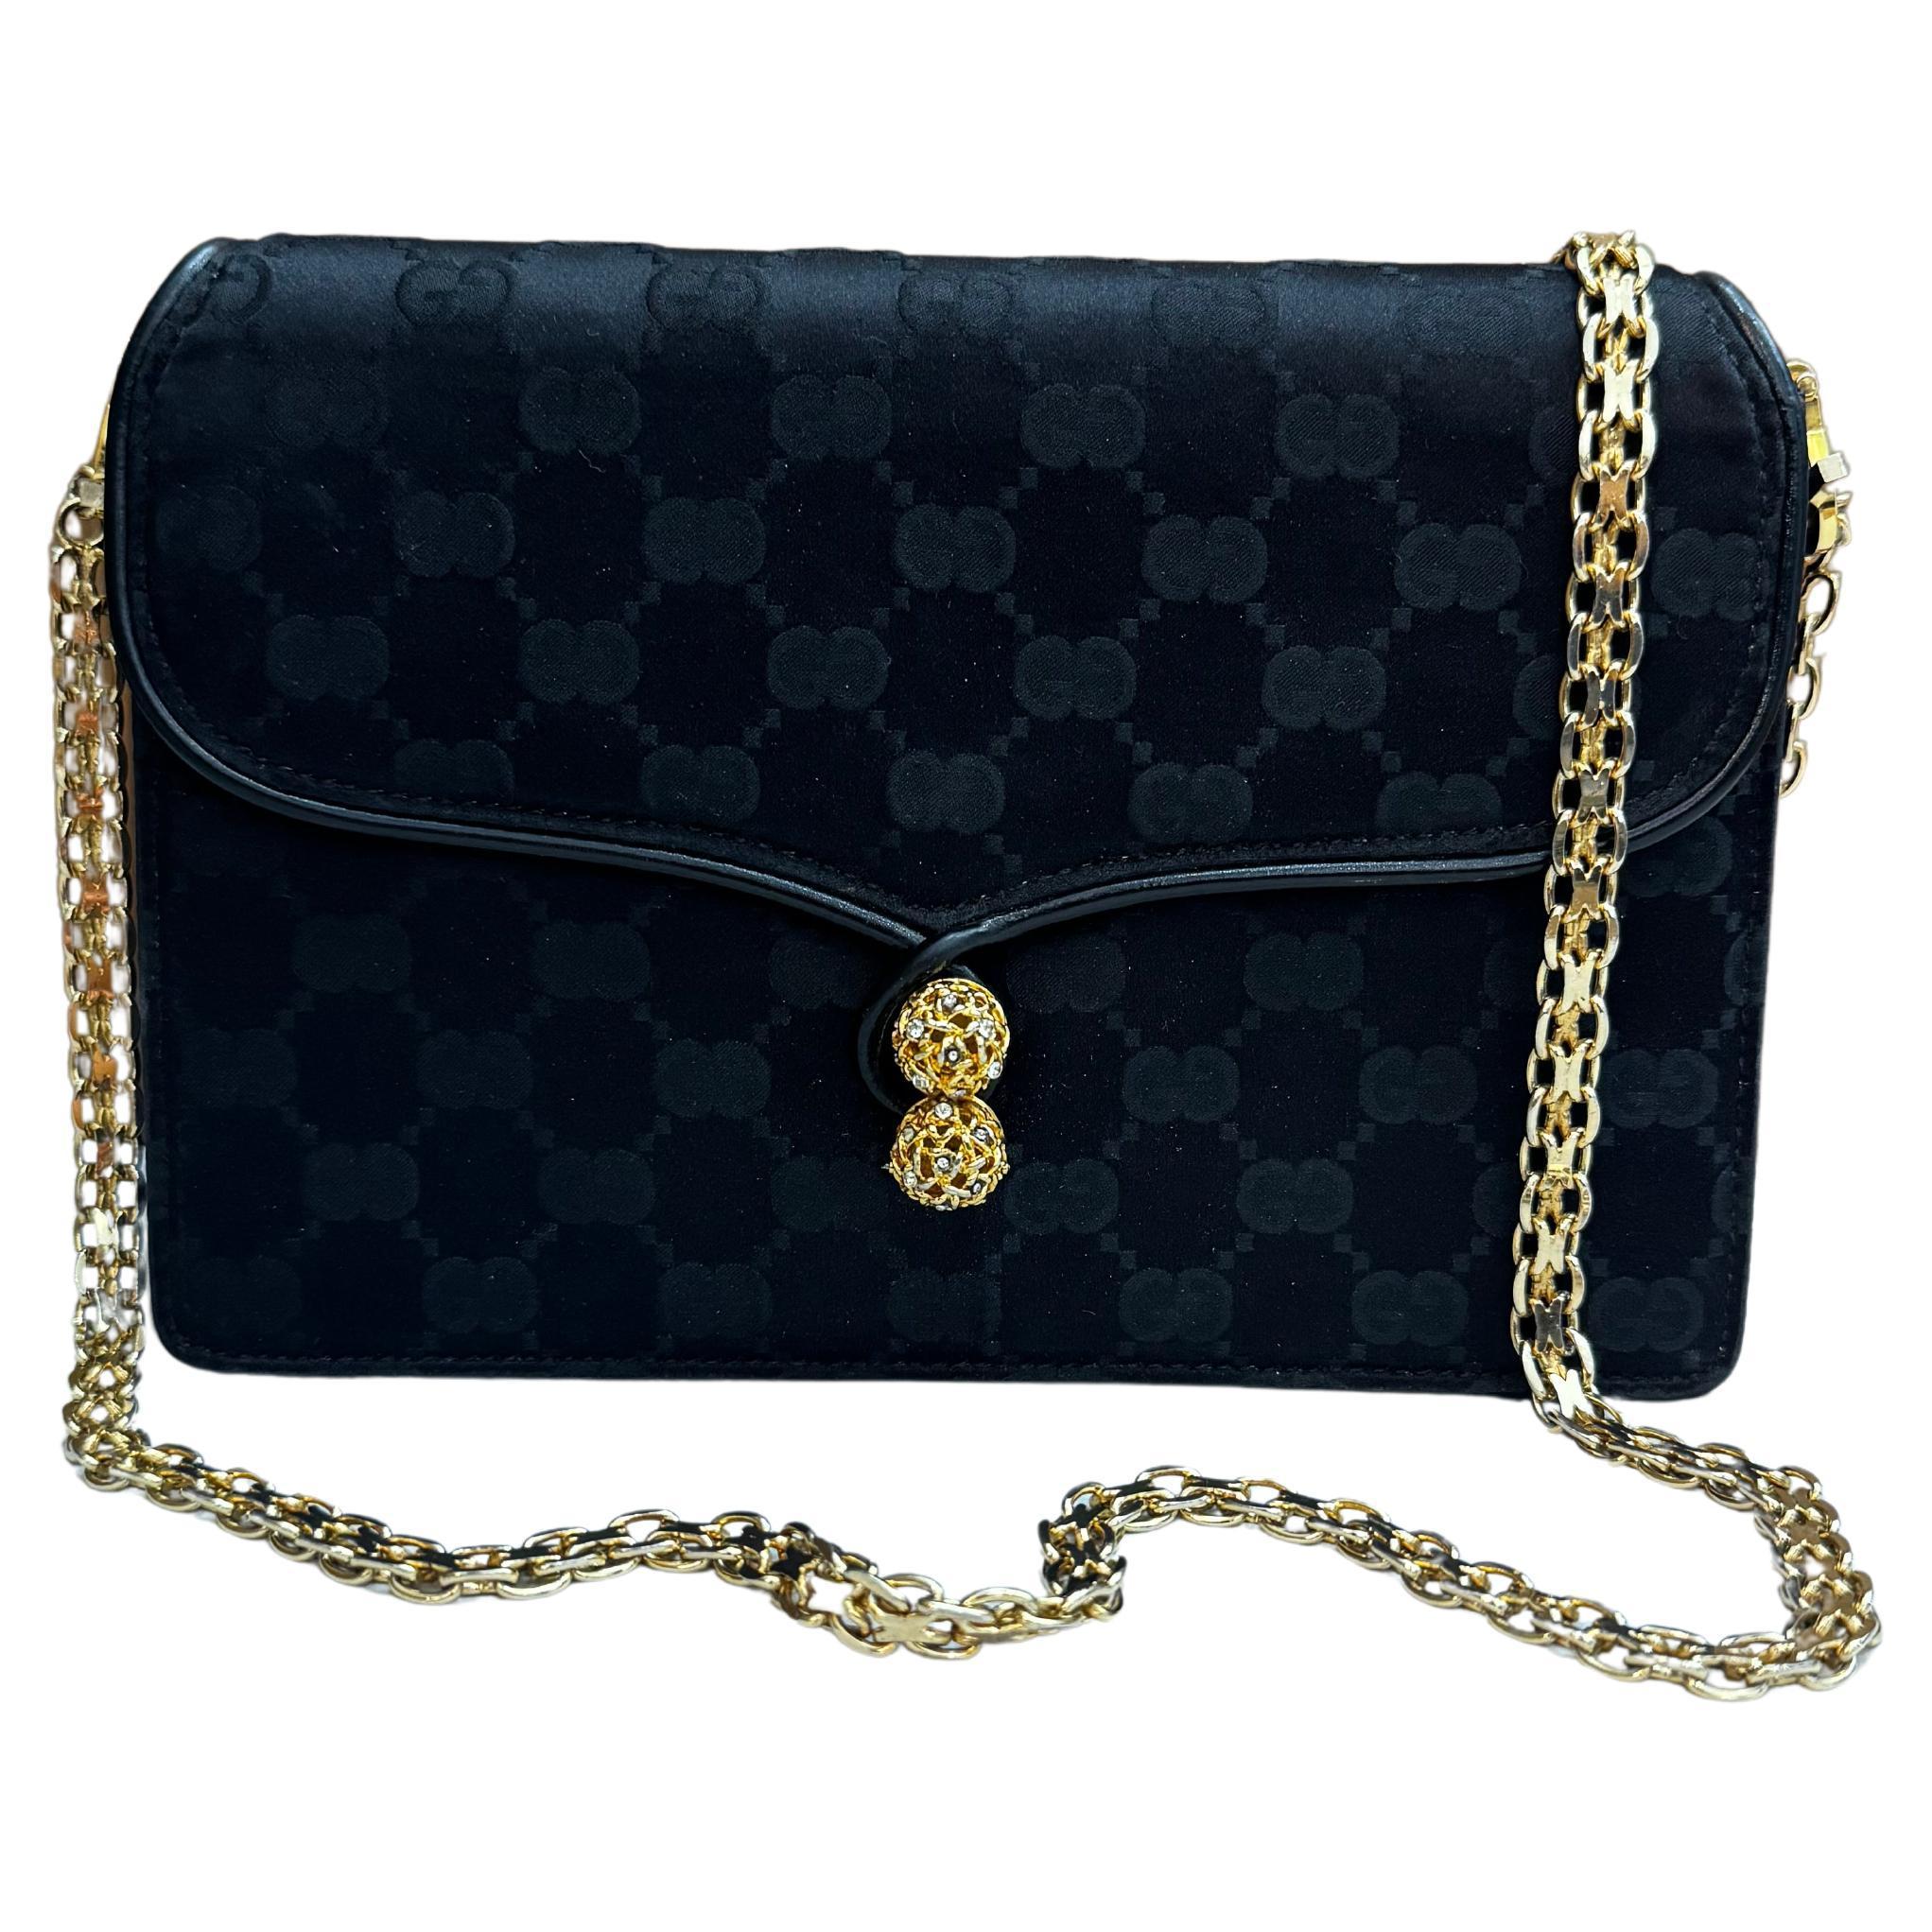 This vintage GUCCI two-way chain clutch shoulder bag is crafted of GG satin jacquard in black featuring gold toned hardware. Front flap closure opens to a silk interior in beige featuring patch pockets and a zippered pocket. This vintage Gucci also